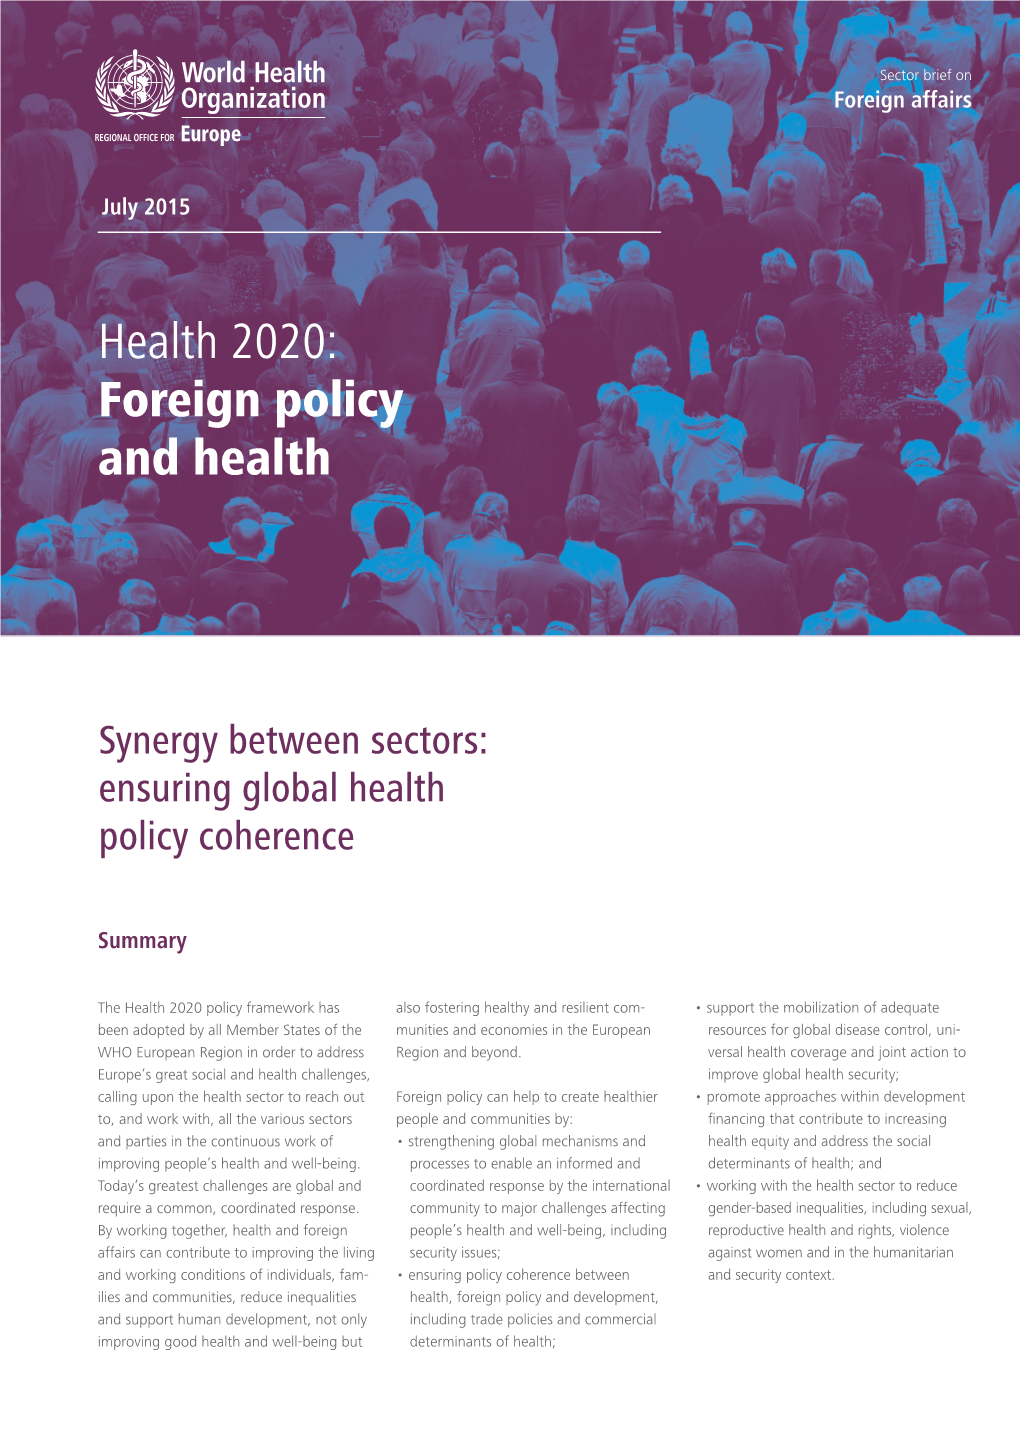 Health 2020: Foreign Policy and Health